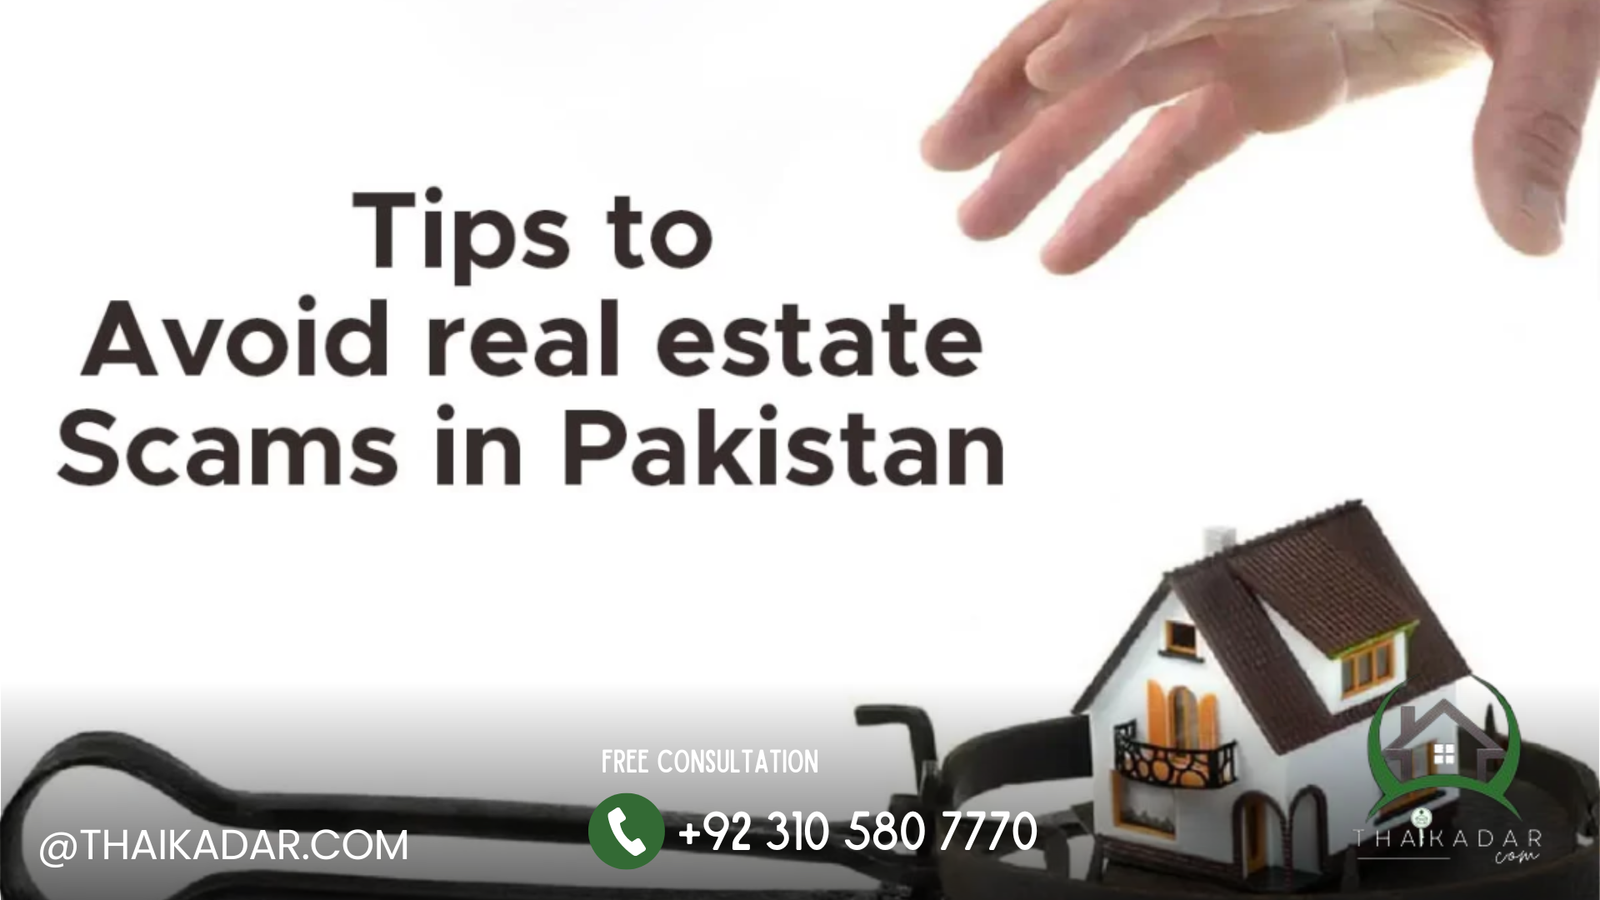 Tips to Avoid Real Estate Scams